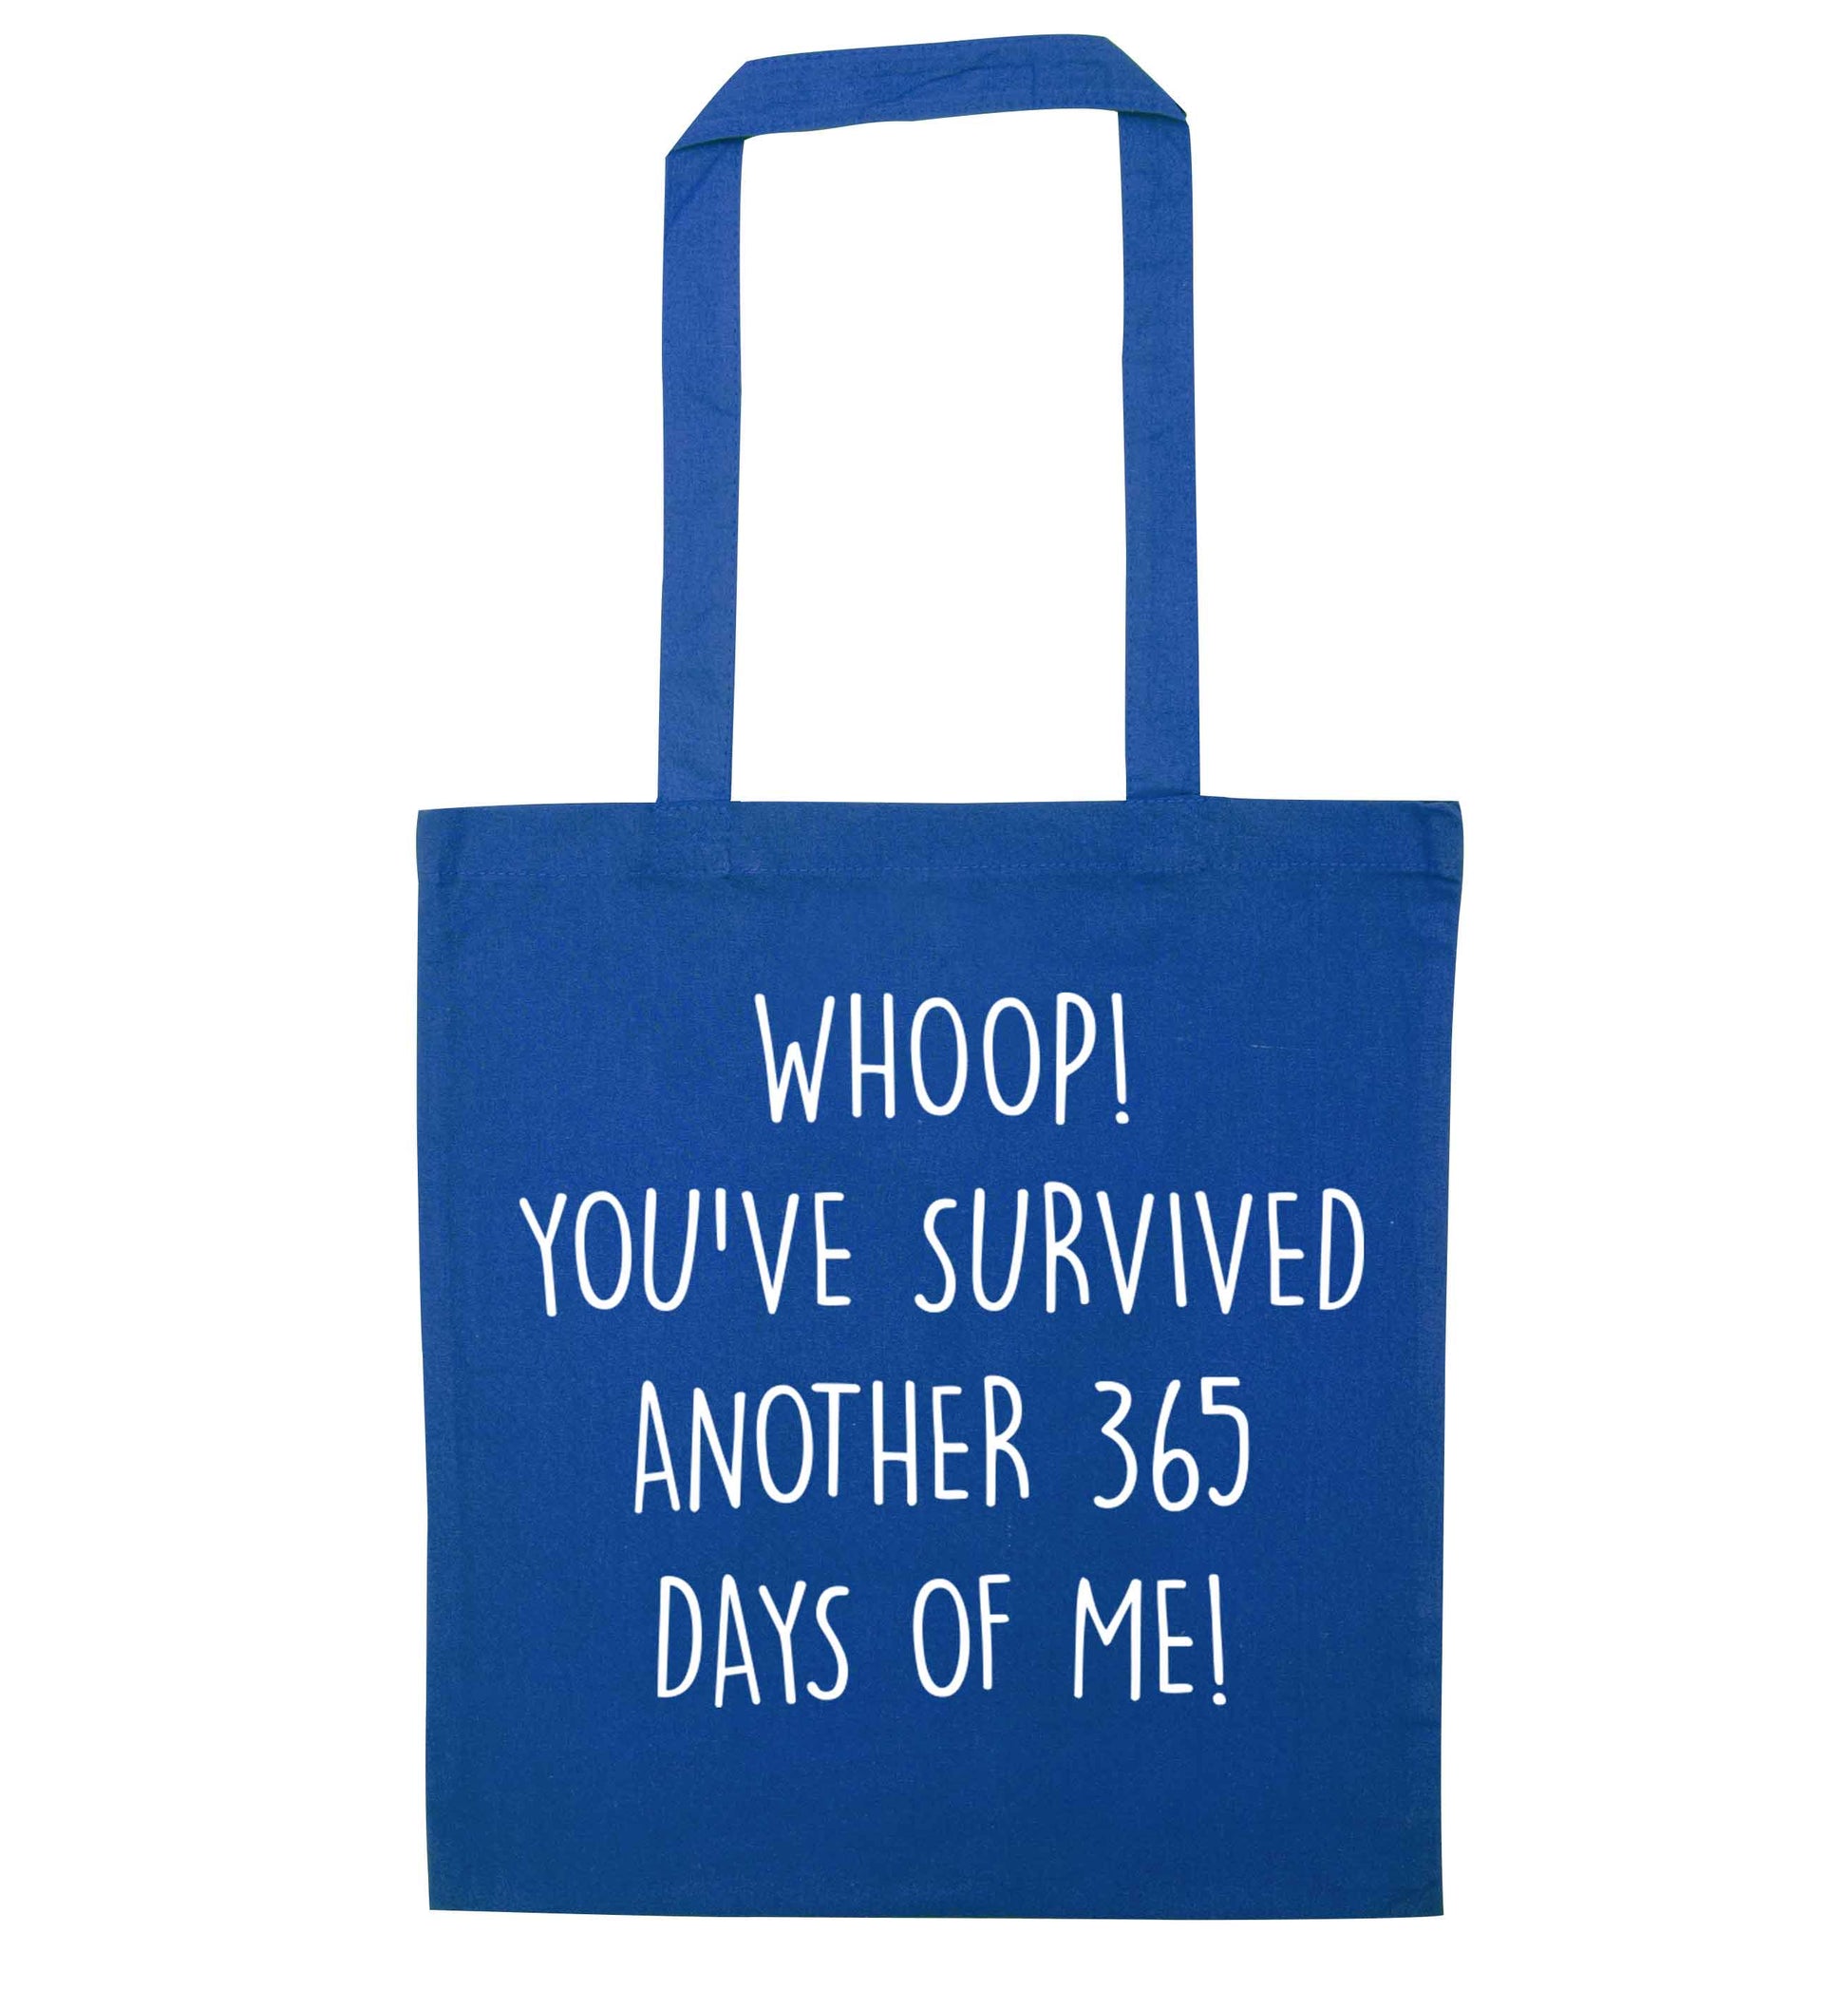 Whoop! You've survived another 365 days with me! blue tote bag